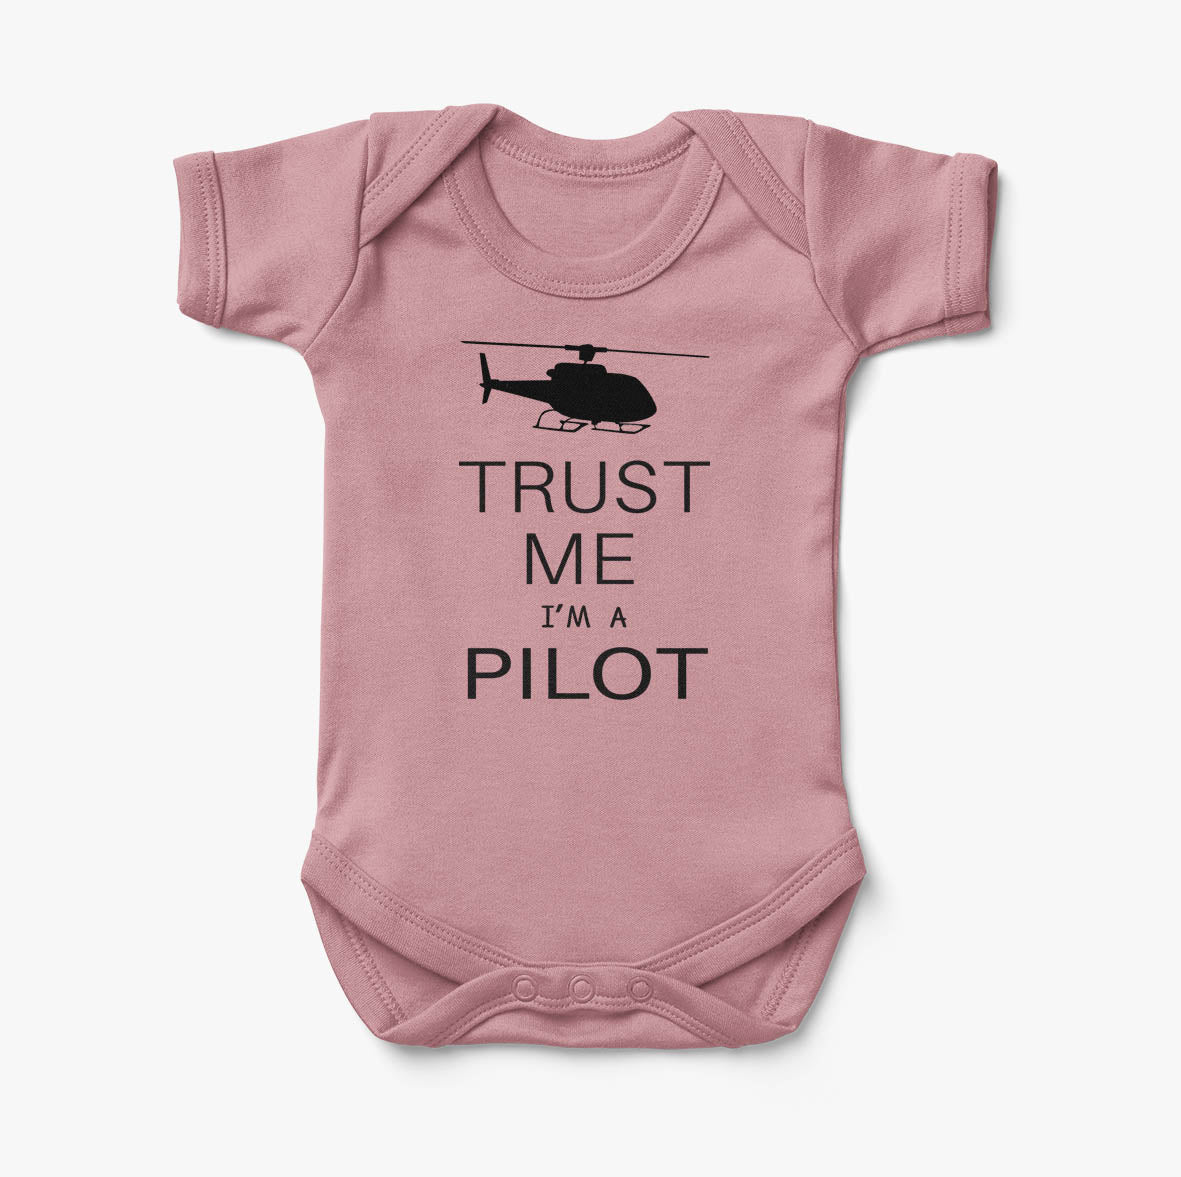 Trust Me I'm a Pilot (Helicopter) Designed Baby Bodysuits